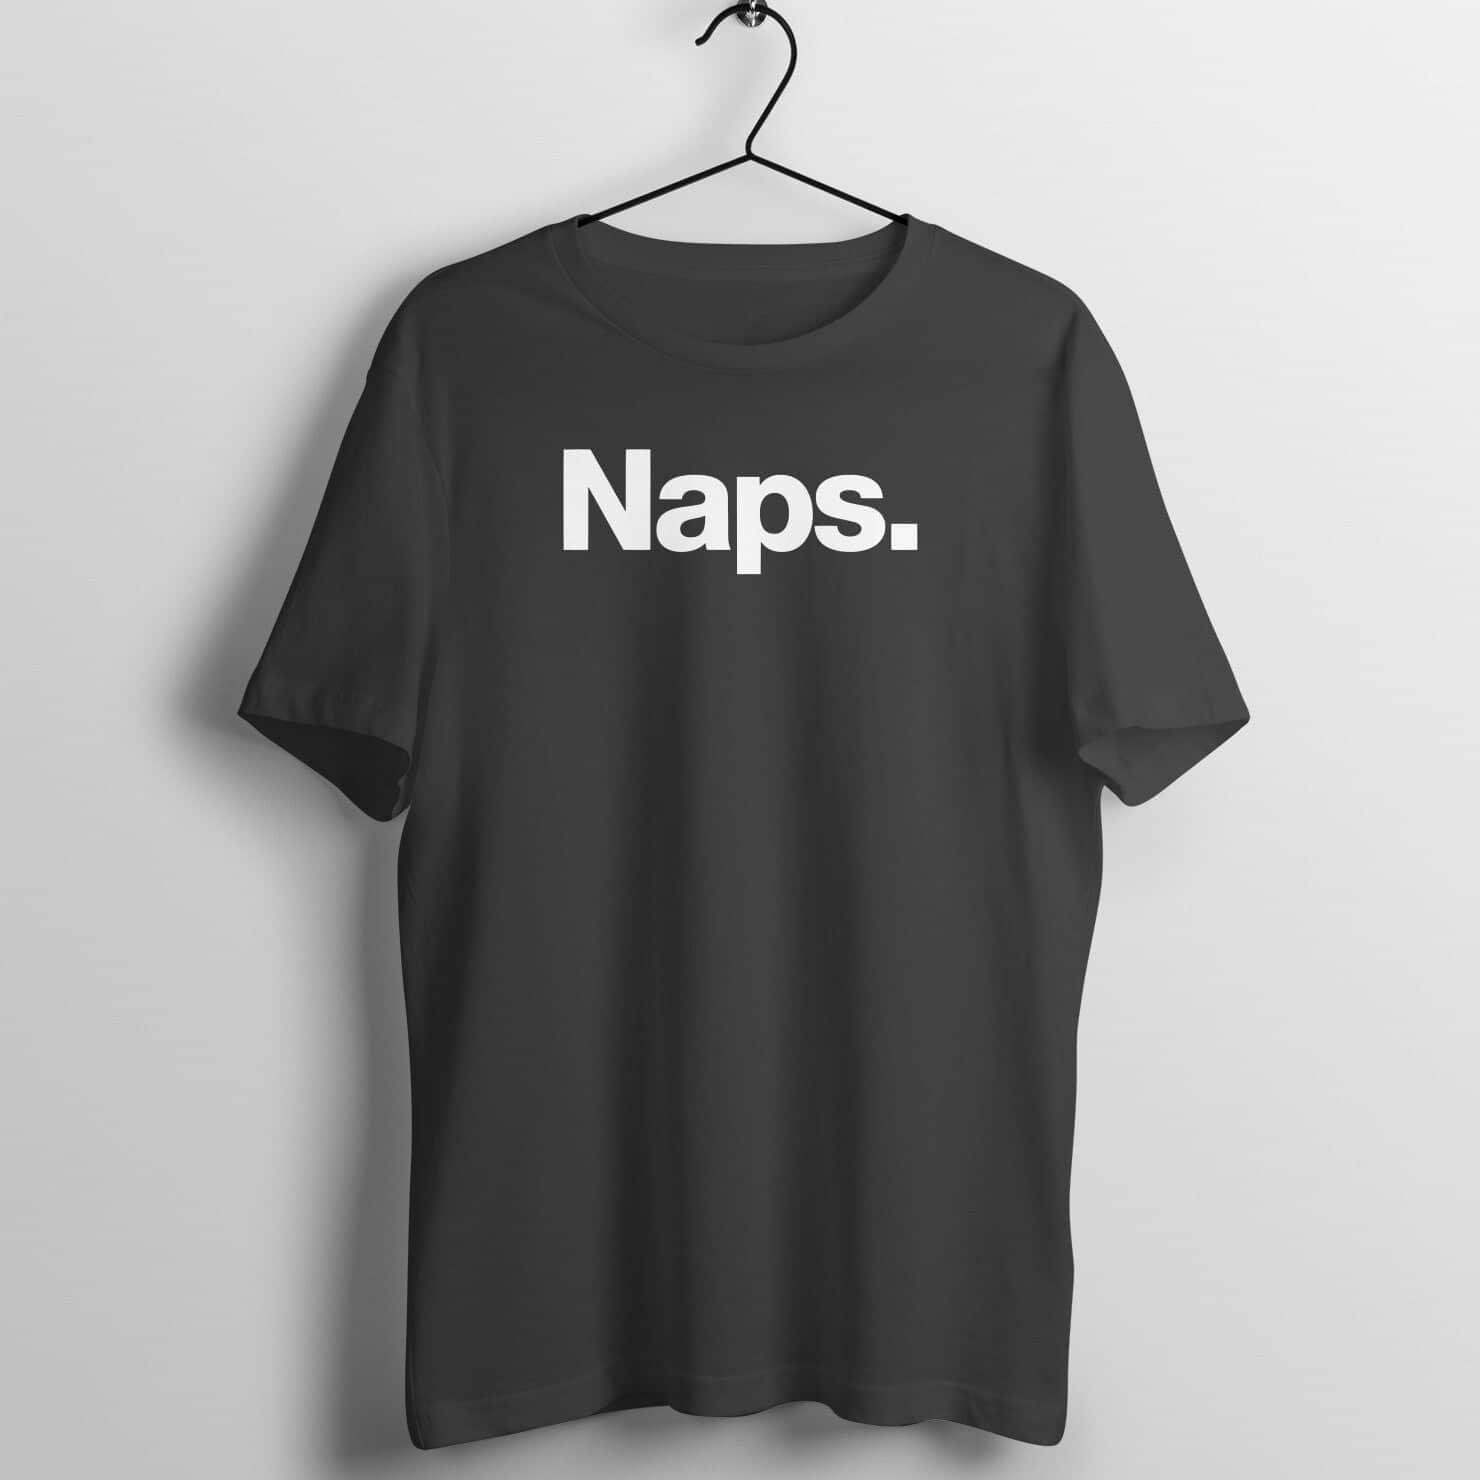 Naps Funny Black T Shirt for Men and Women freeshipping - Catch My Drift India